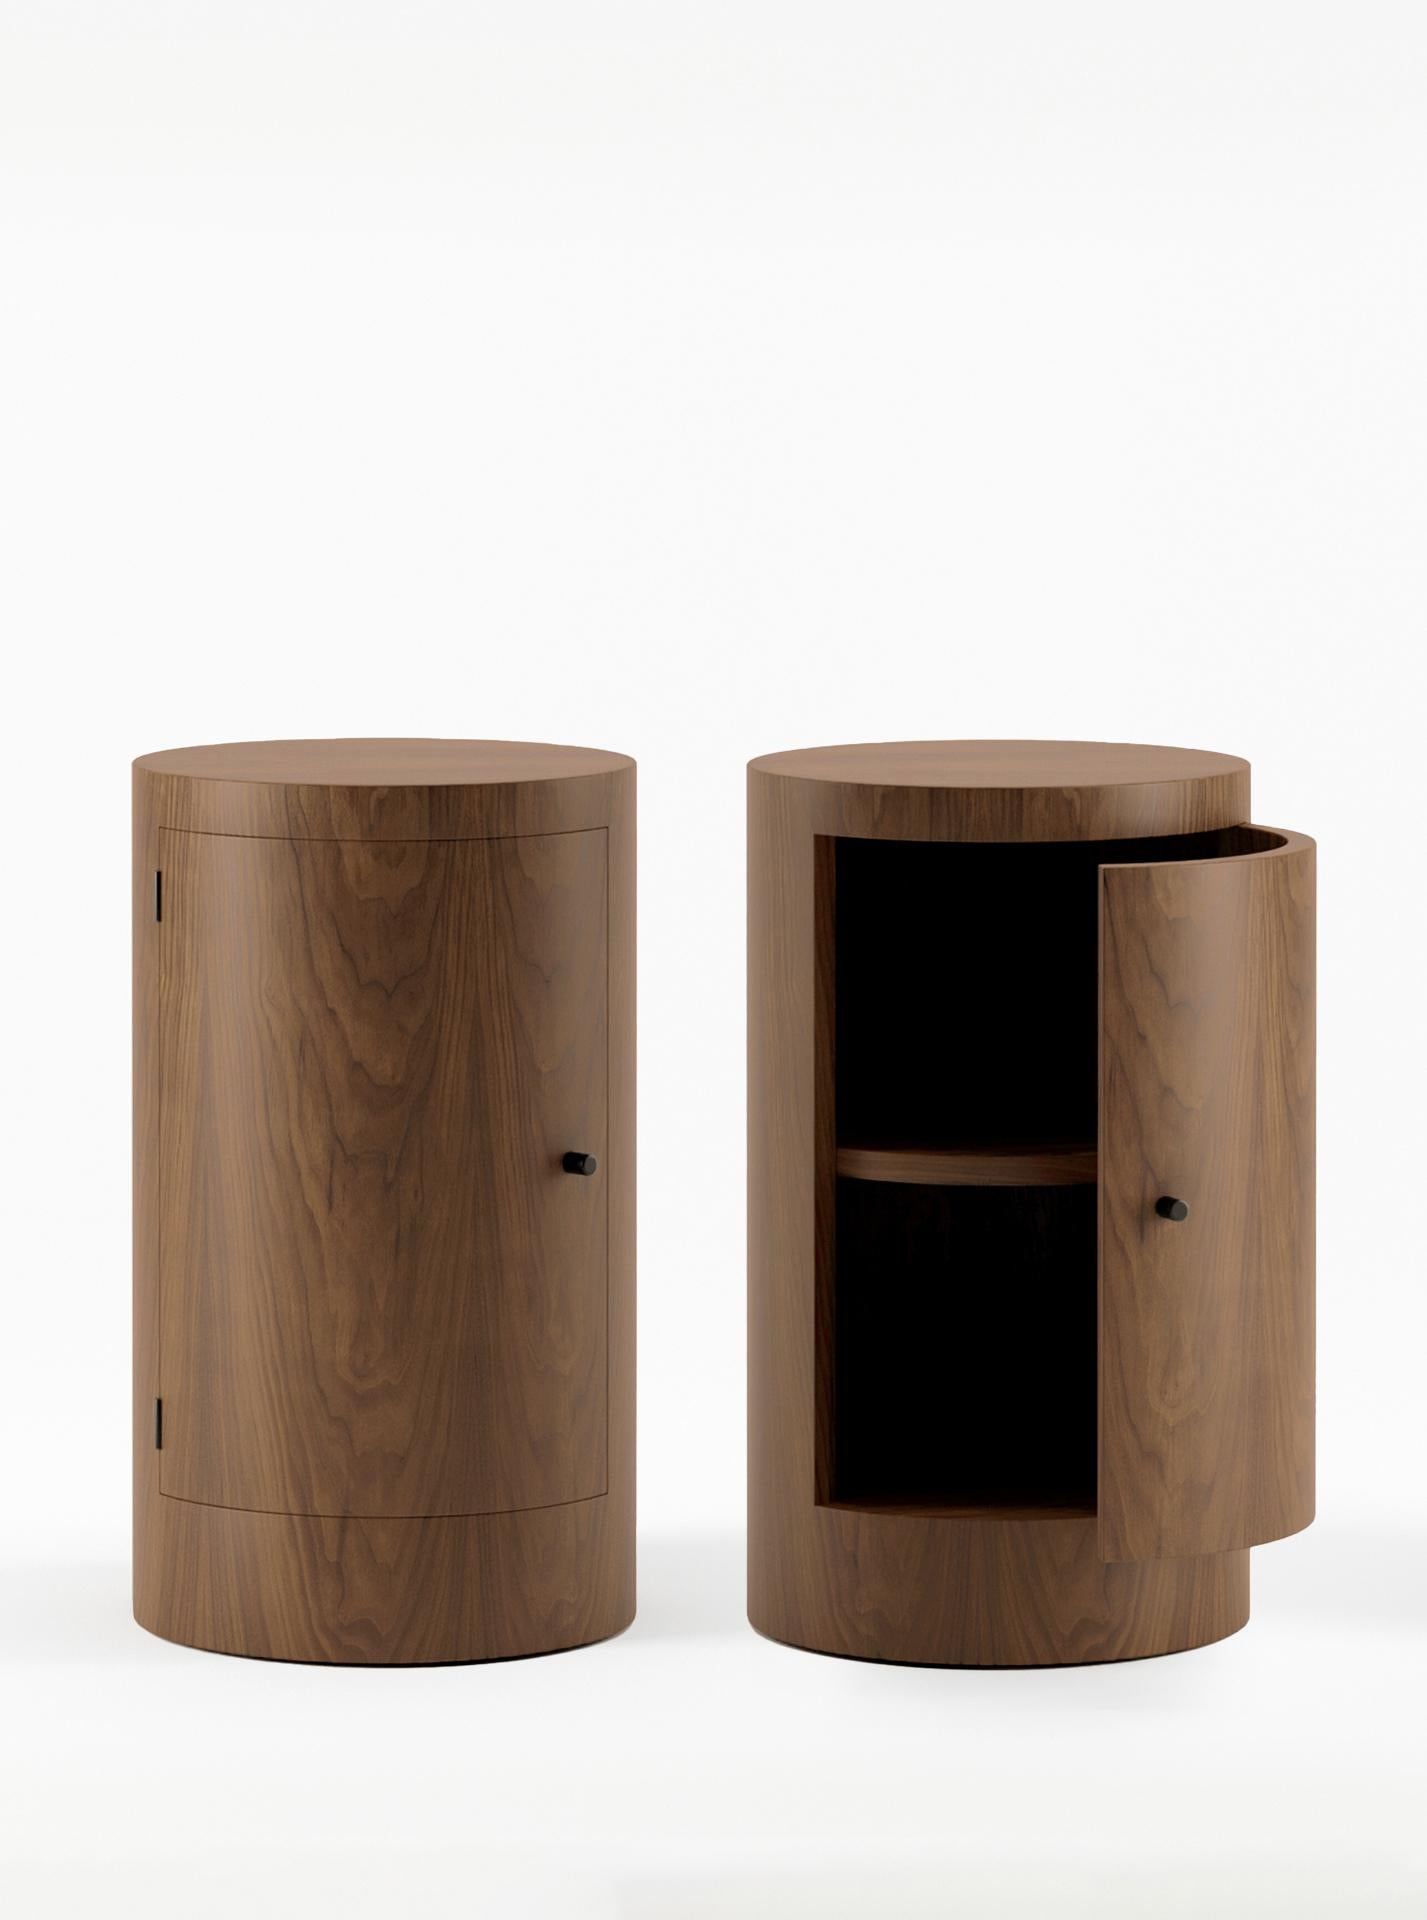 South African Pair of Constant Night Stands in Walnut by Master Studio for Lemon For Sale